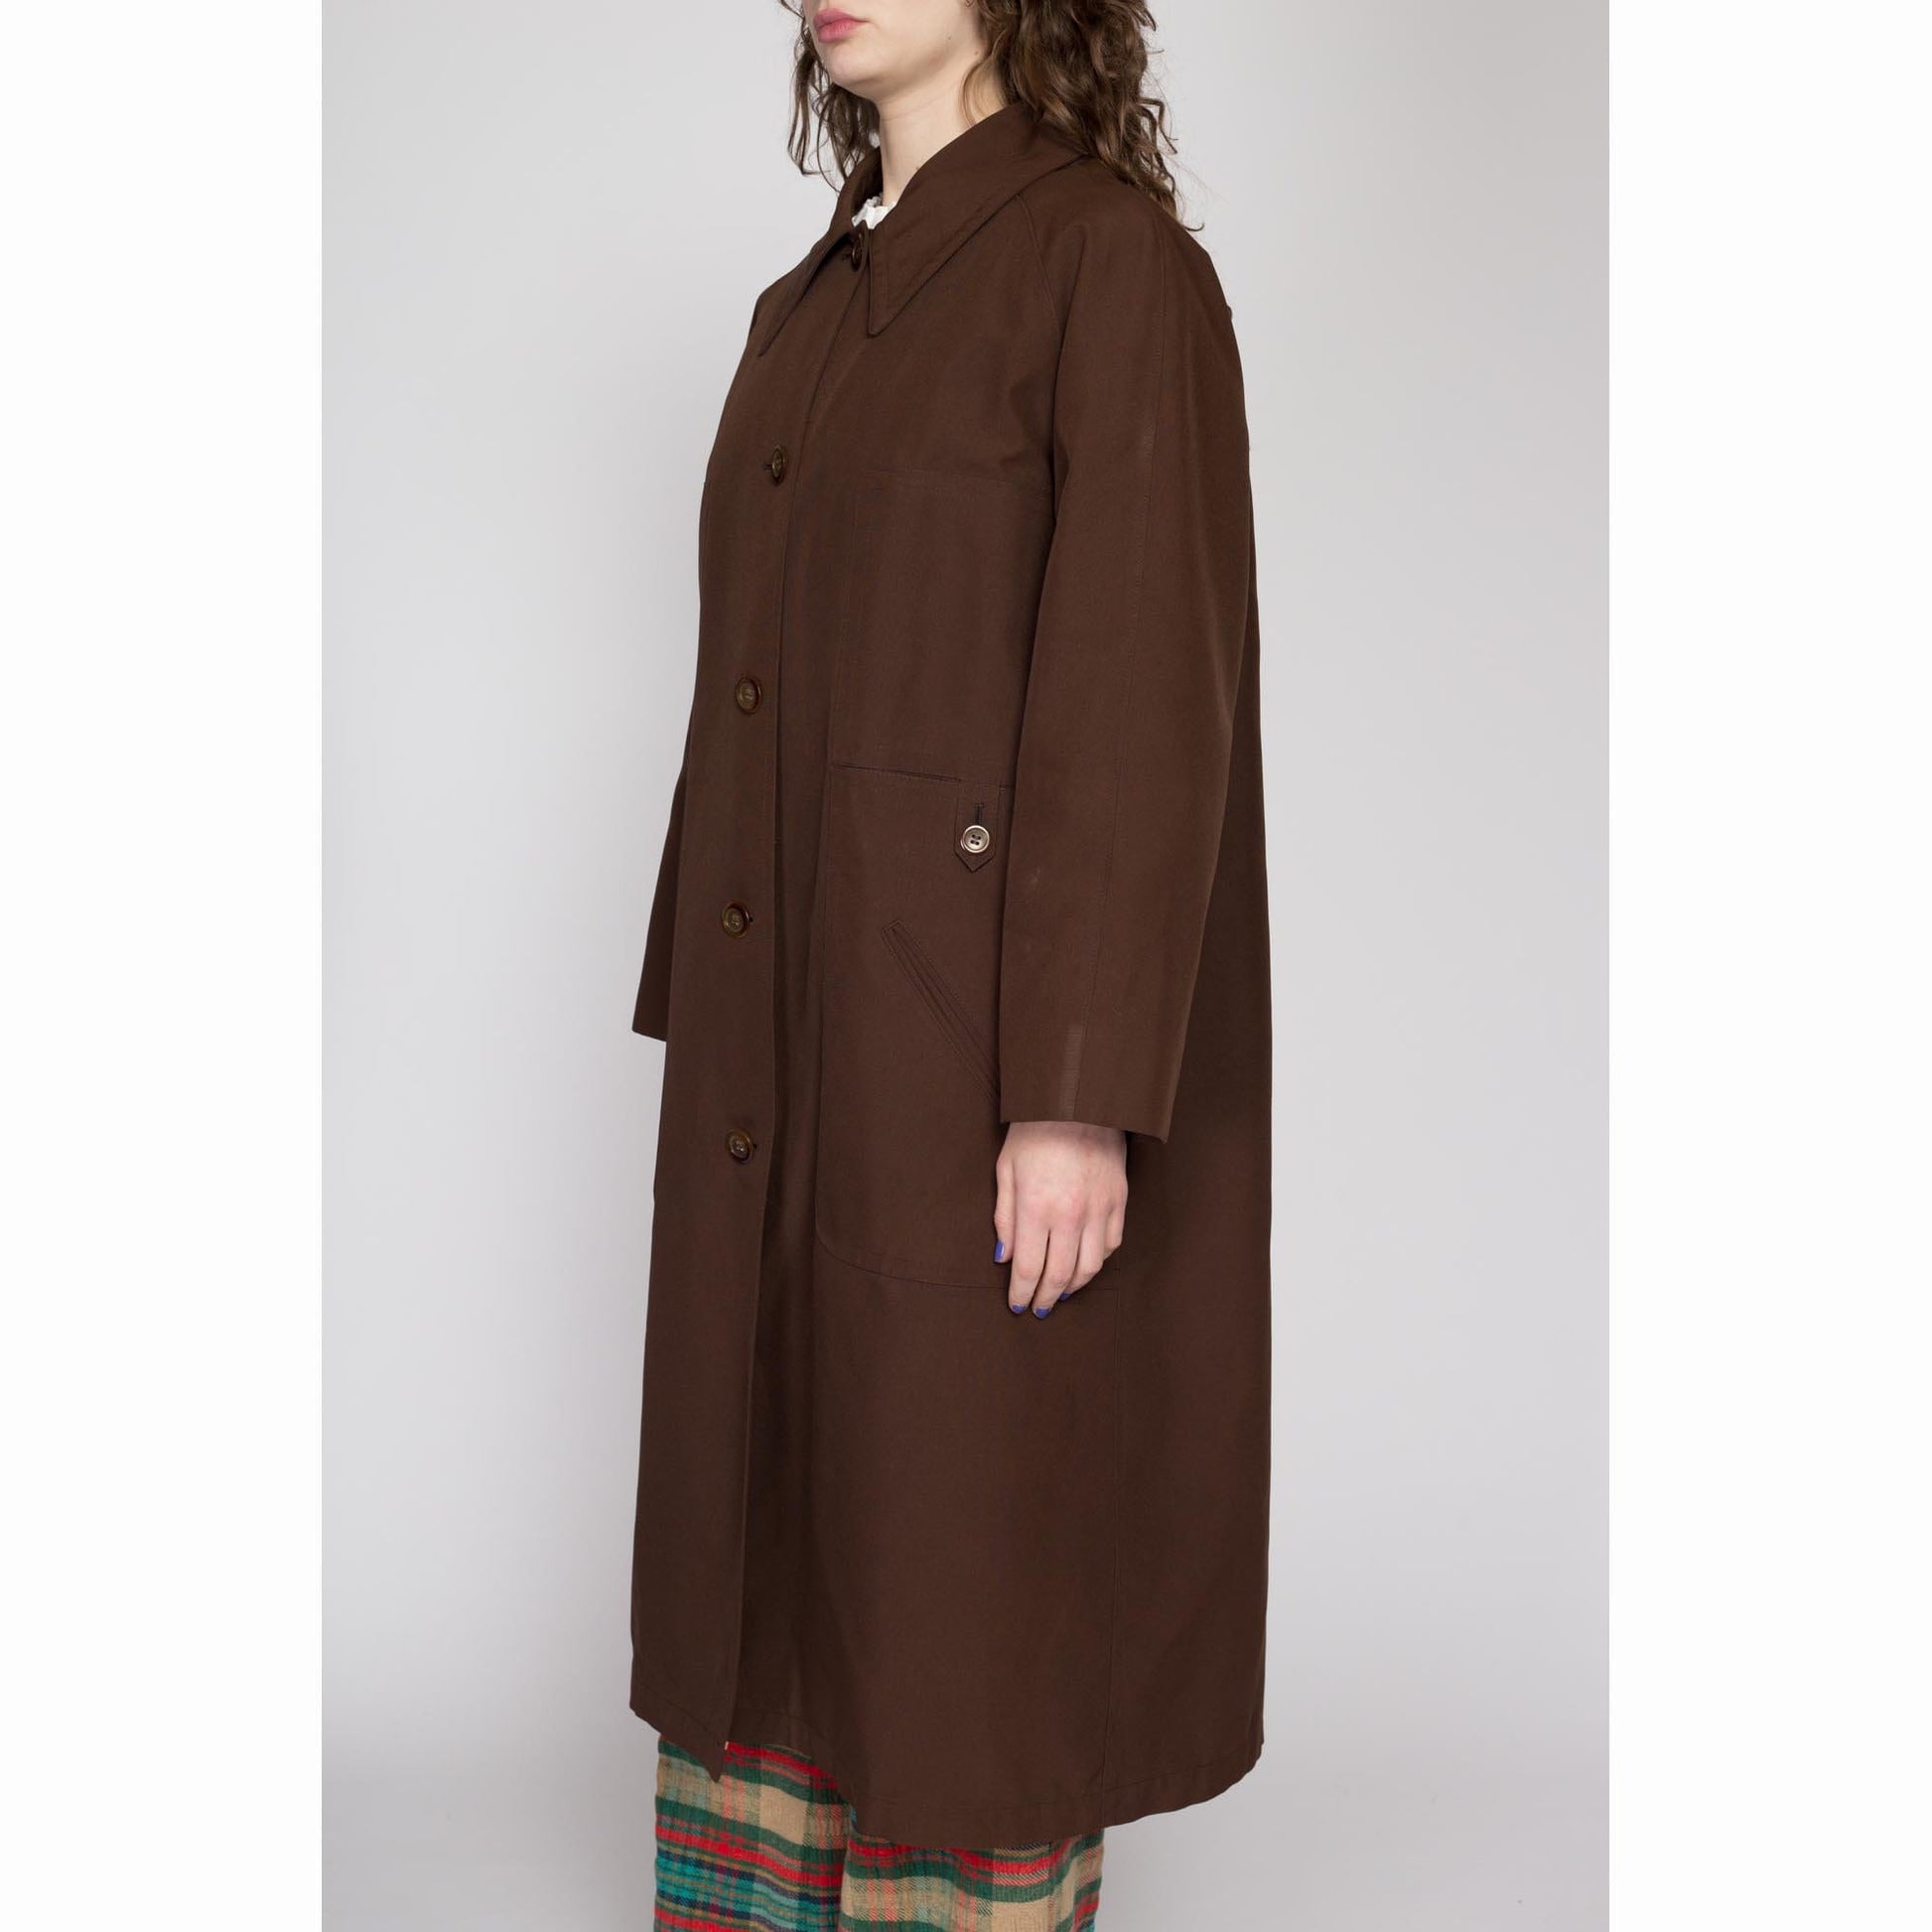 2X 80s Brown Plaid Lined Trench Coat | Vintage Misty Harbor Minimalist Long Duster Rain Jacket